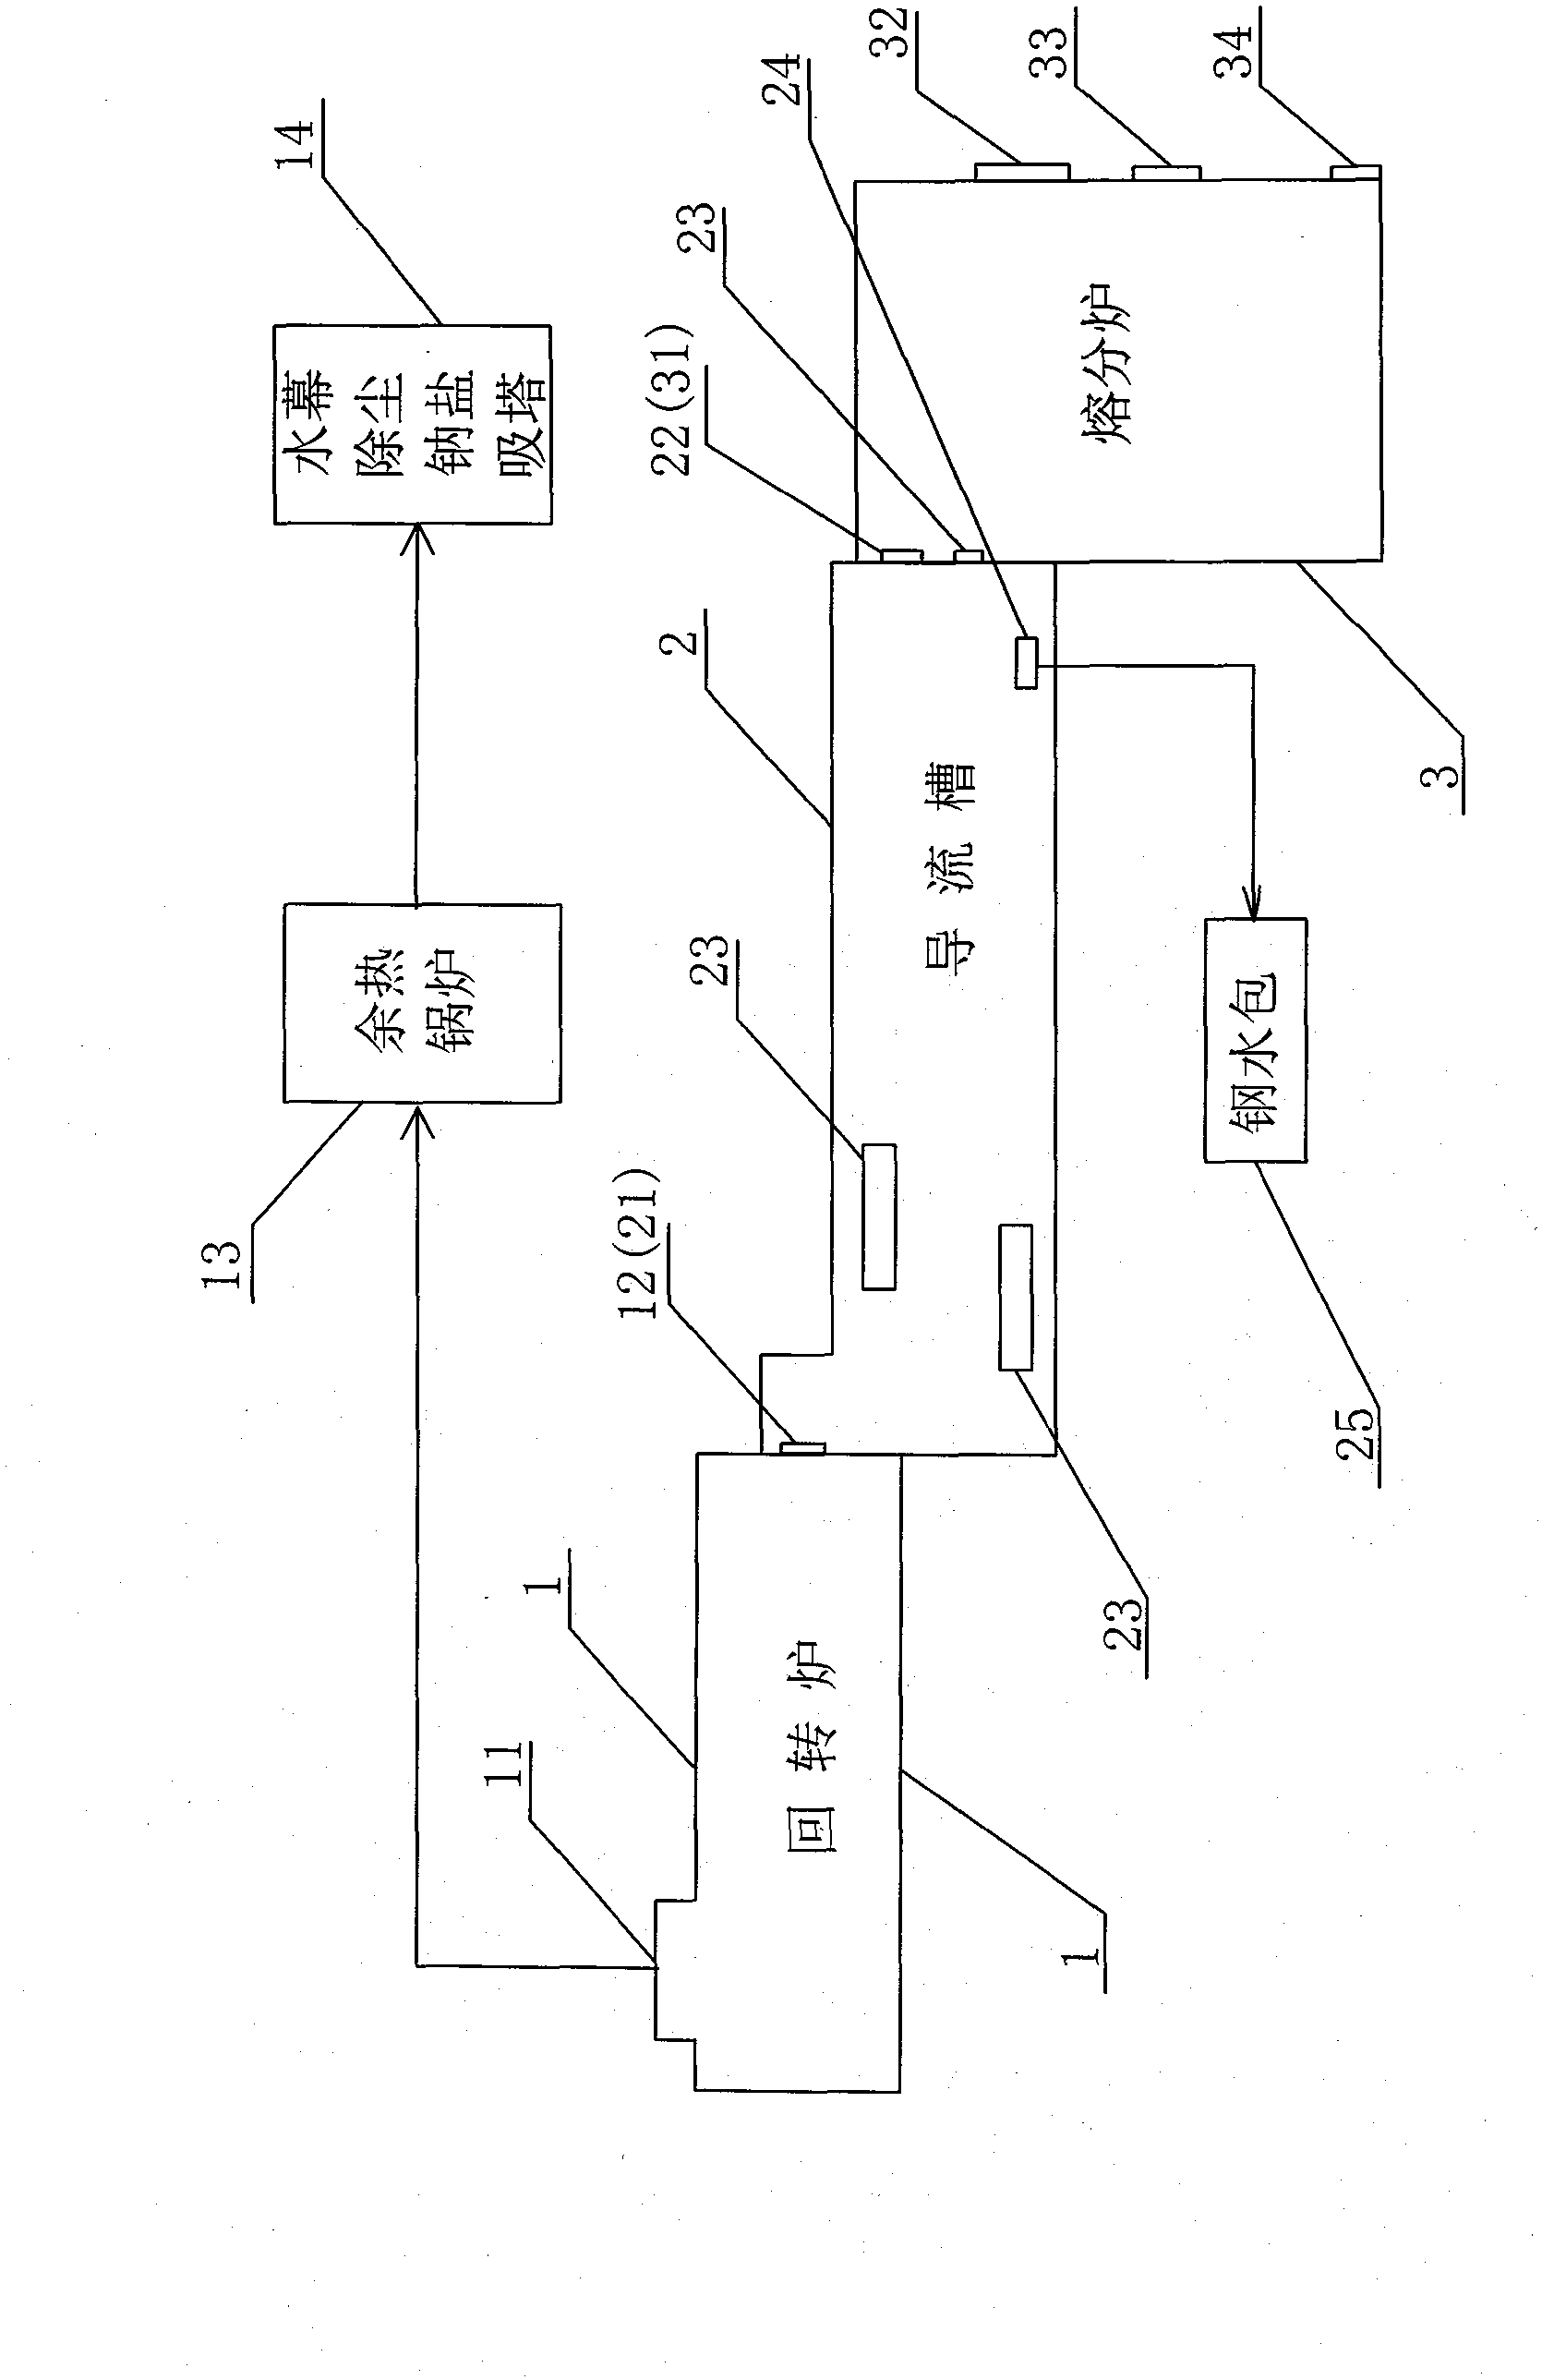 Process for preparing hot molten iron and byproducts by utilizing red mud